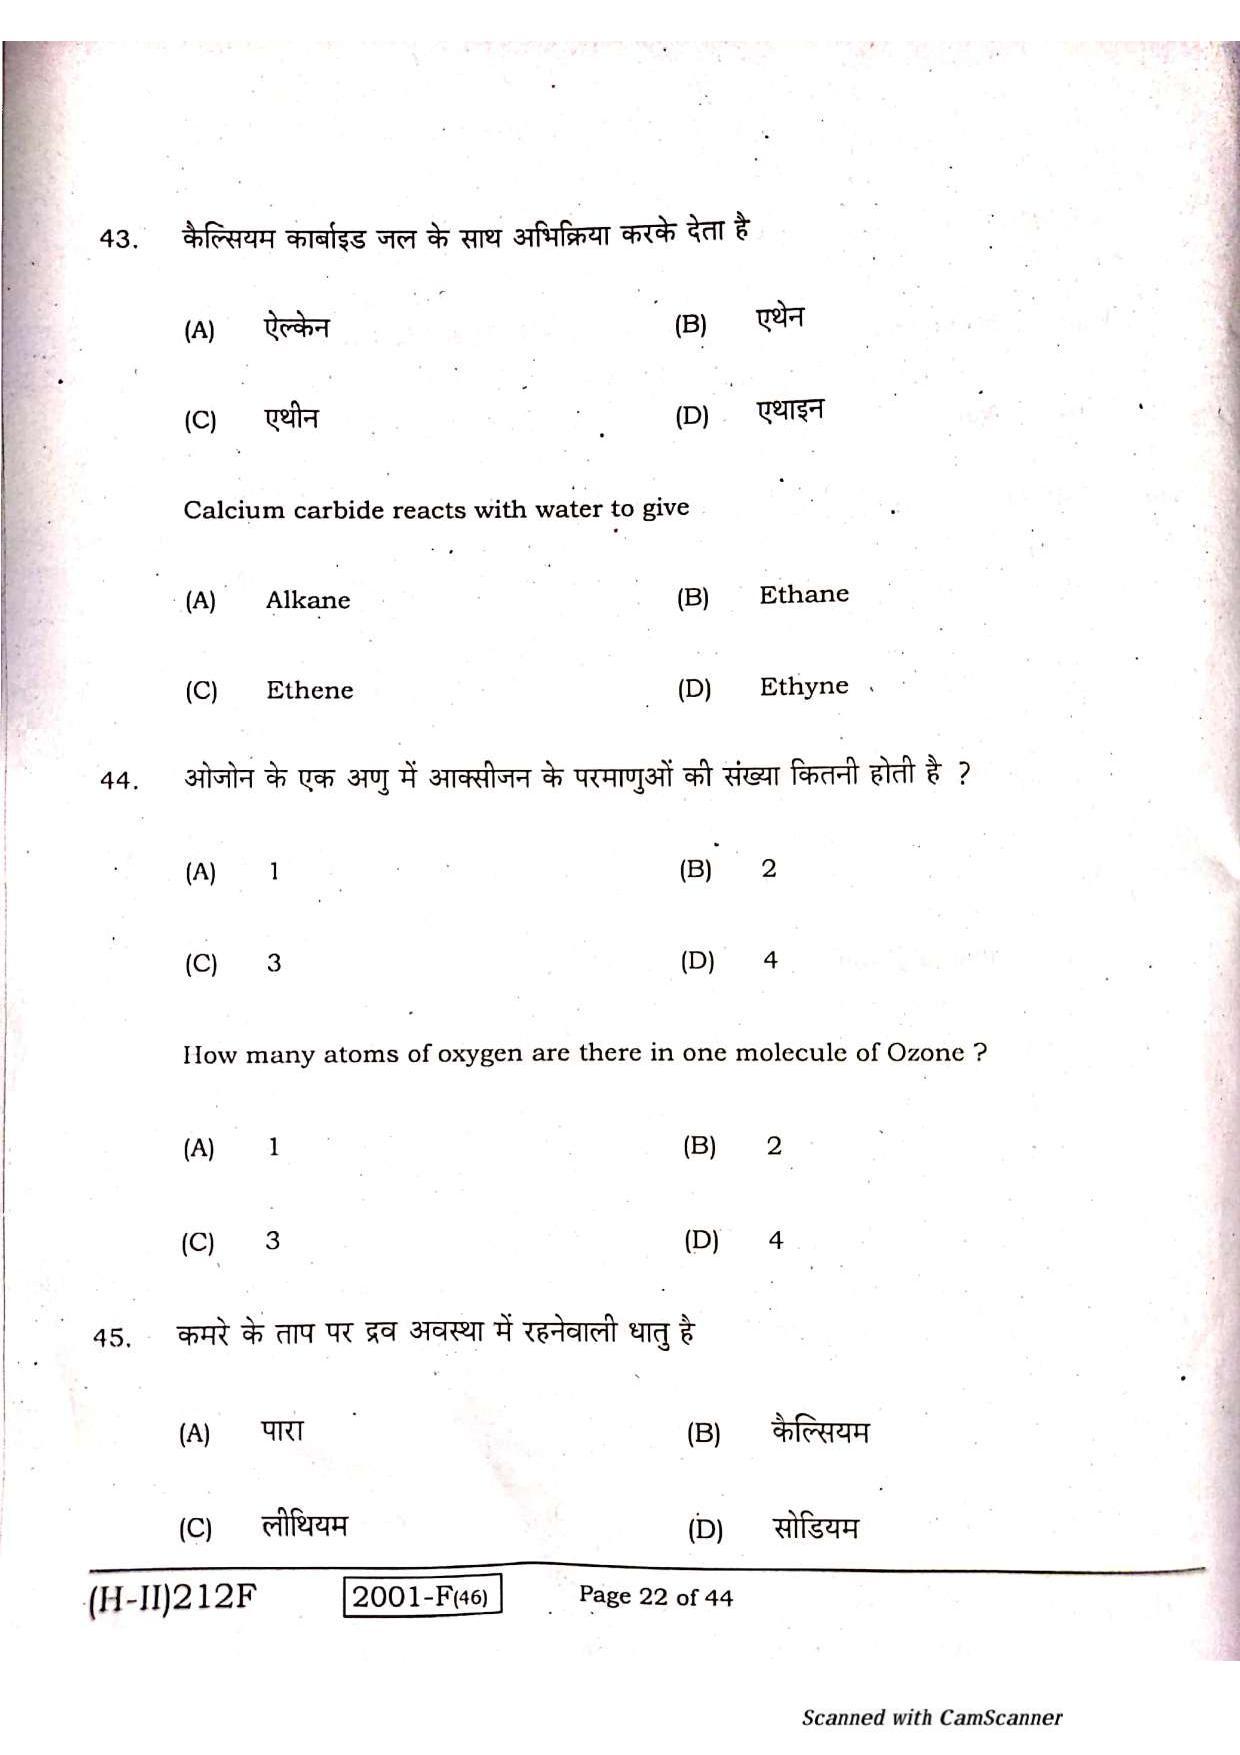 Bihar Board Class 10 Science 2021 (2nd Sitting) Question Paper - Page 20